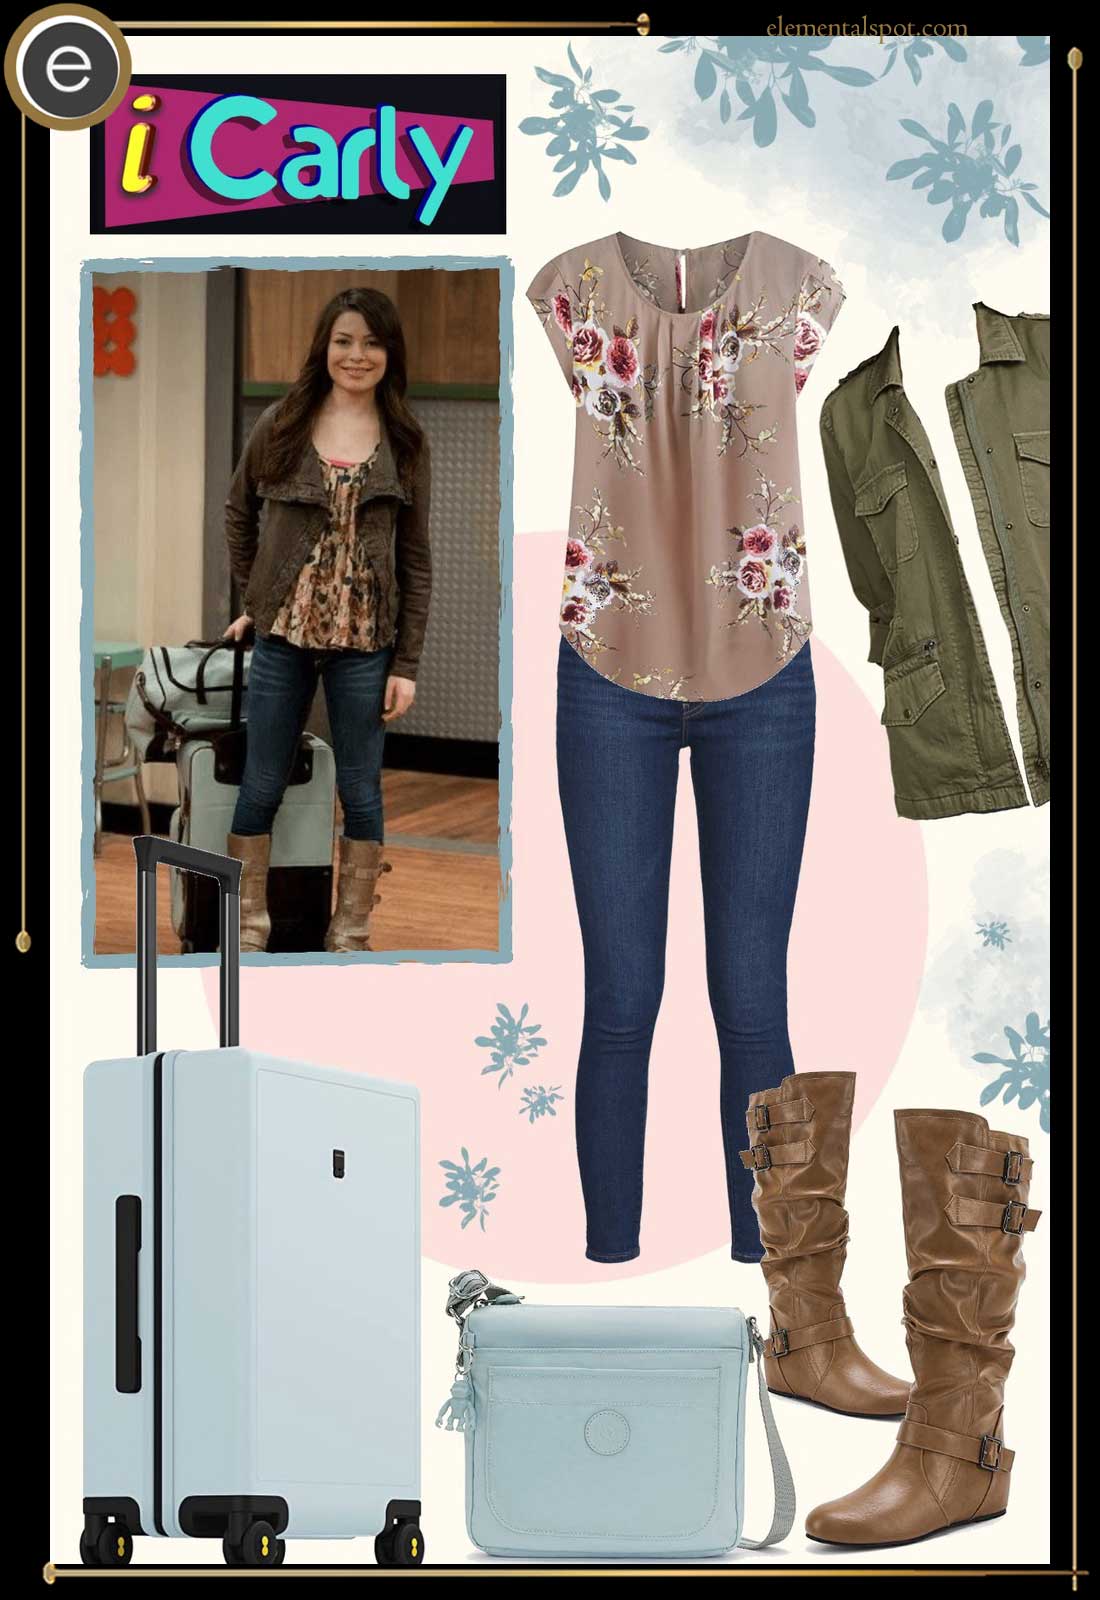 icarly costumes for girls